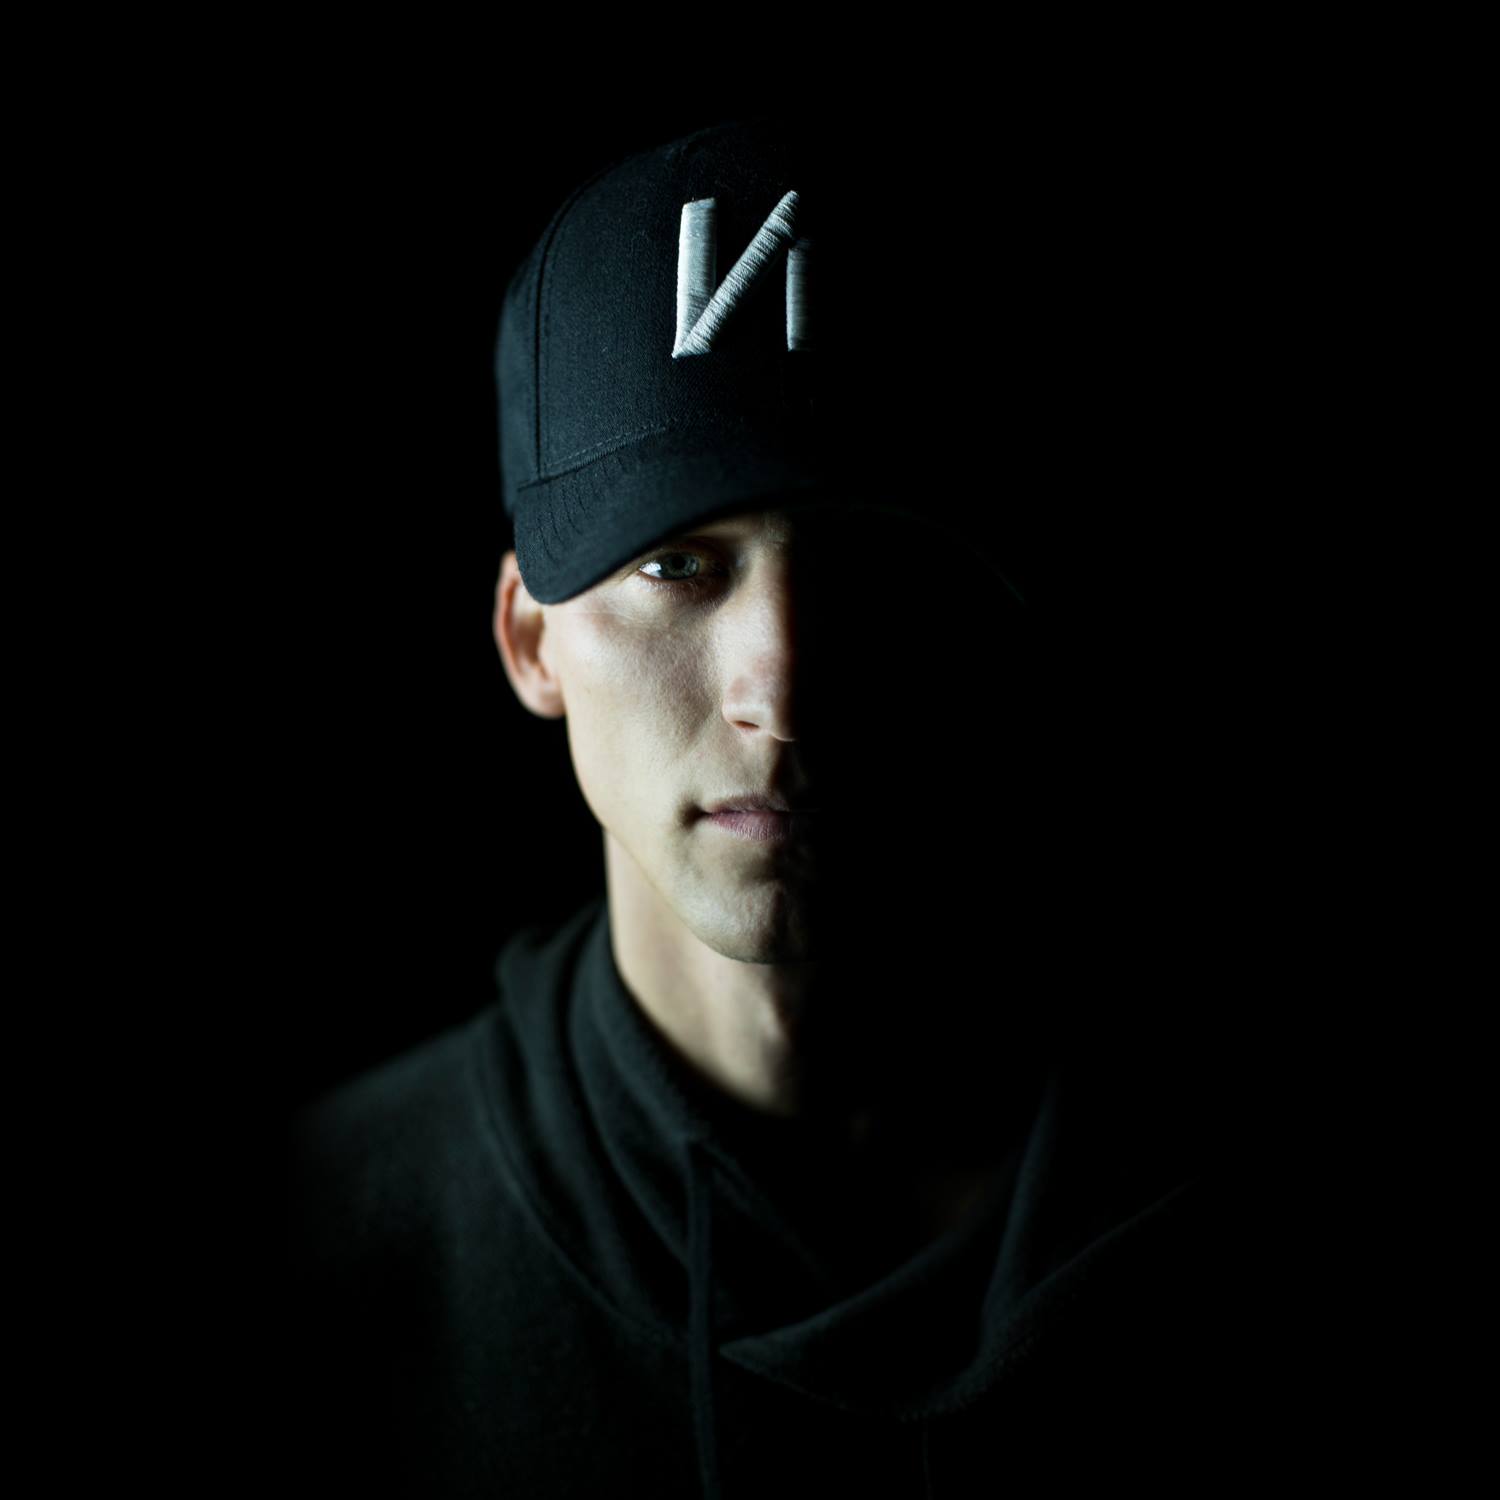 NF Drops Single, in Post) - Music Videos, News - Indie Vision Music